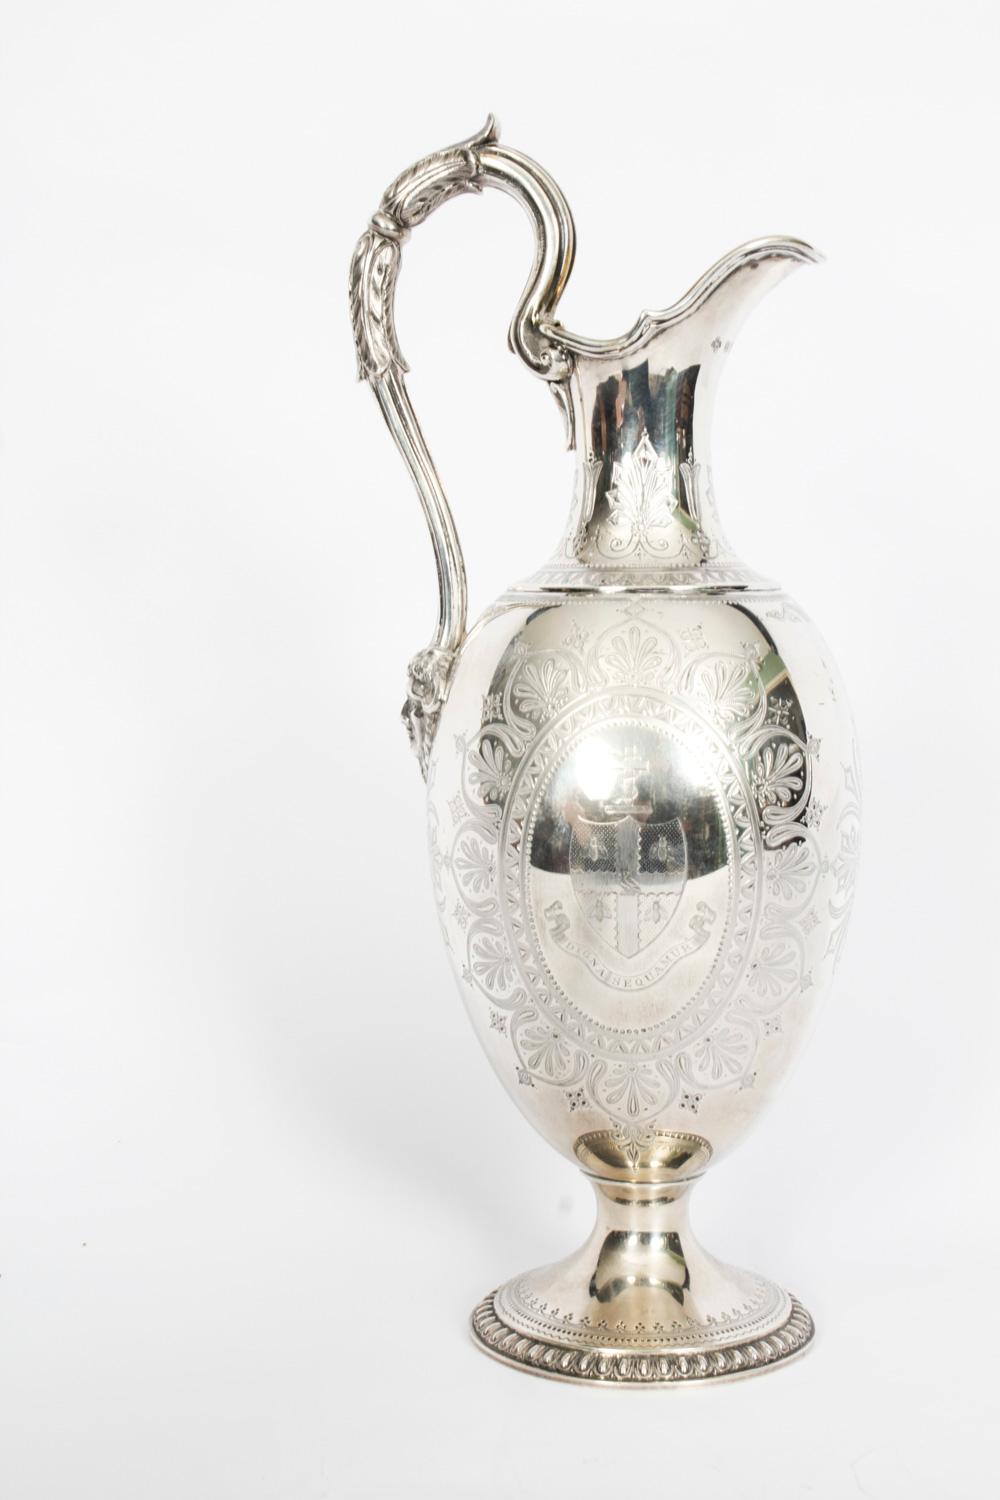 A wonderful antique English Victorian sterling silver claret jug with hallmarks for London 1876 and the maker's mark of the renowned silversmith Edward Barnard & Sons.
 
It has an impressive scroll handle and is embellished with the most wonderful